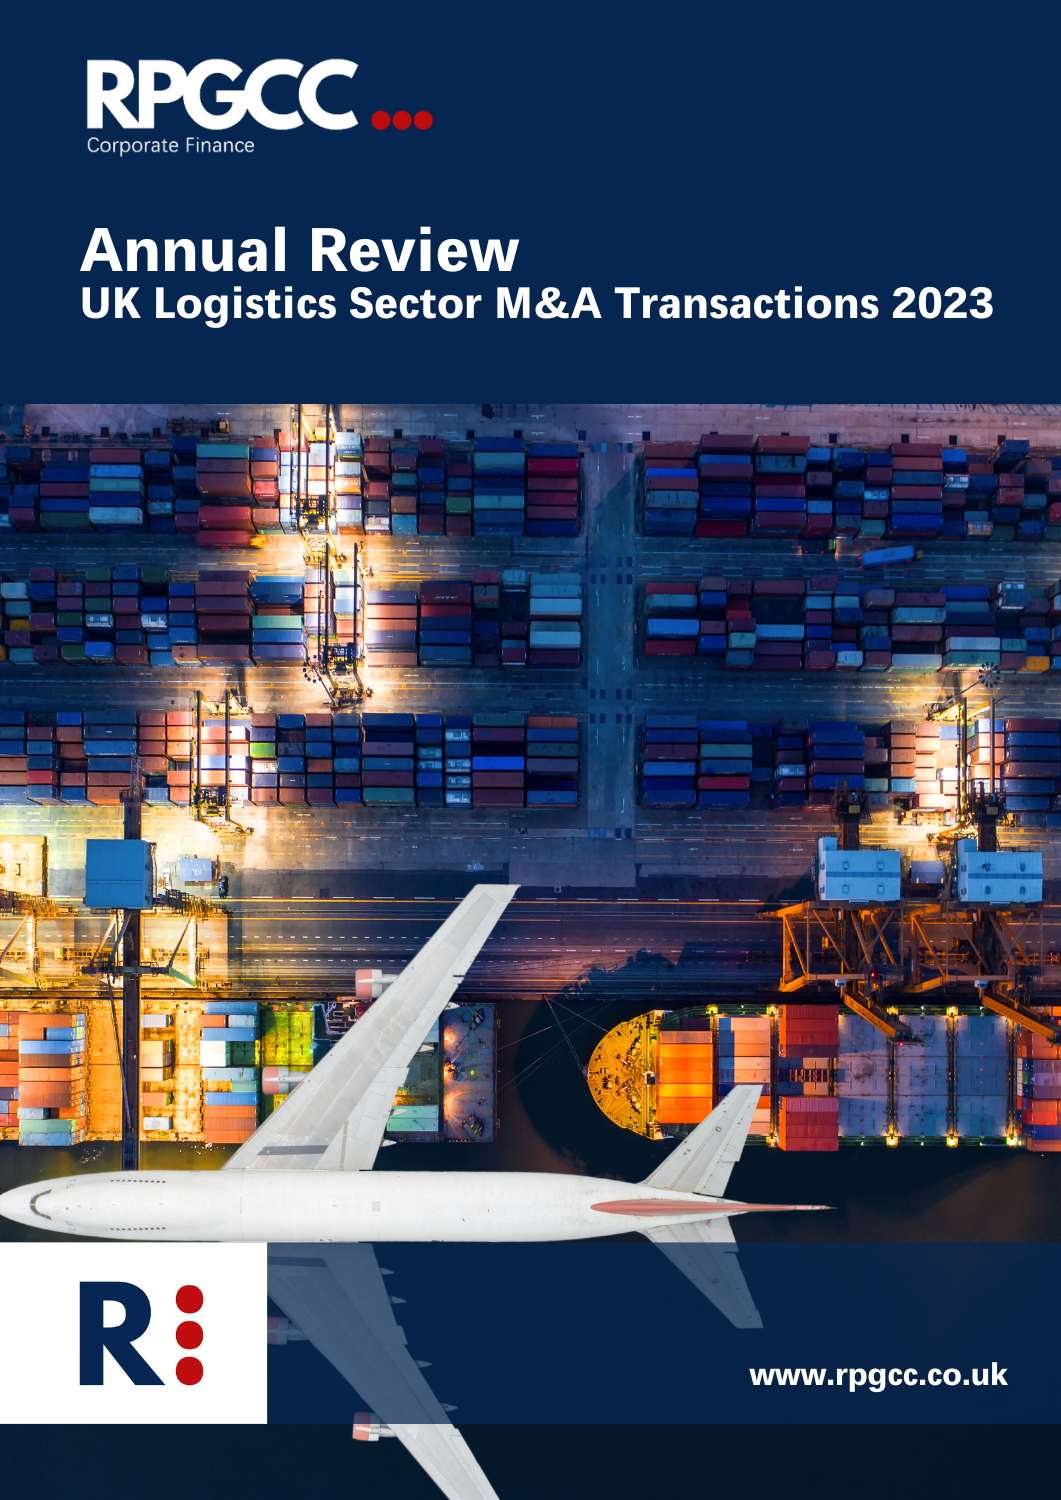 Annual Review of UK M&A logistics transactions 2023